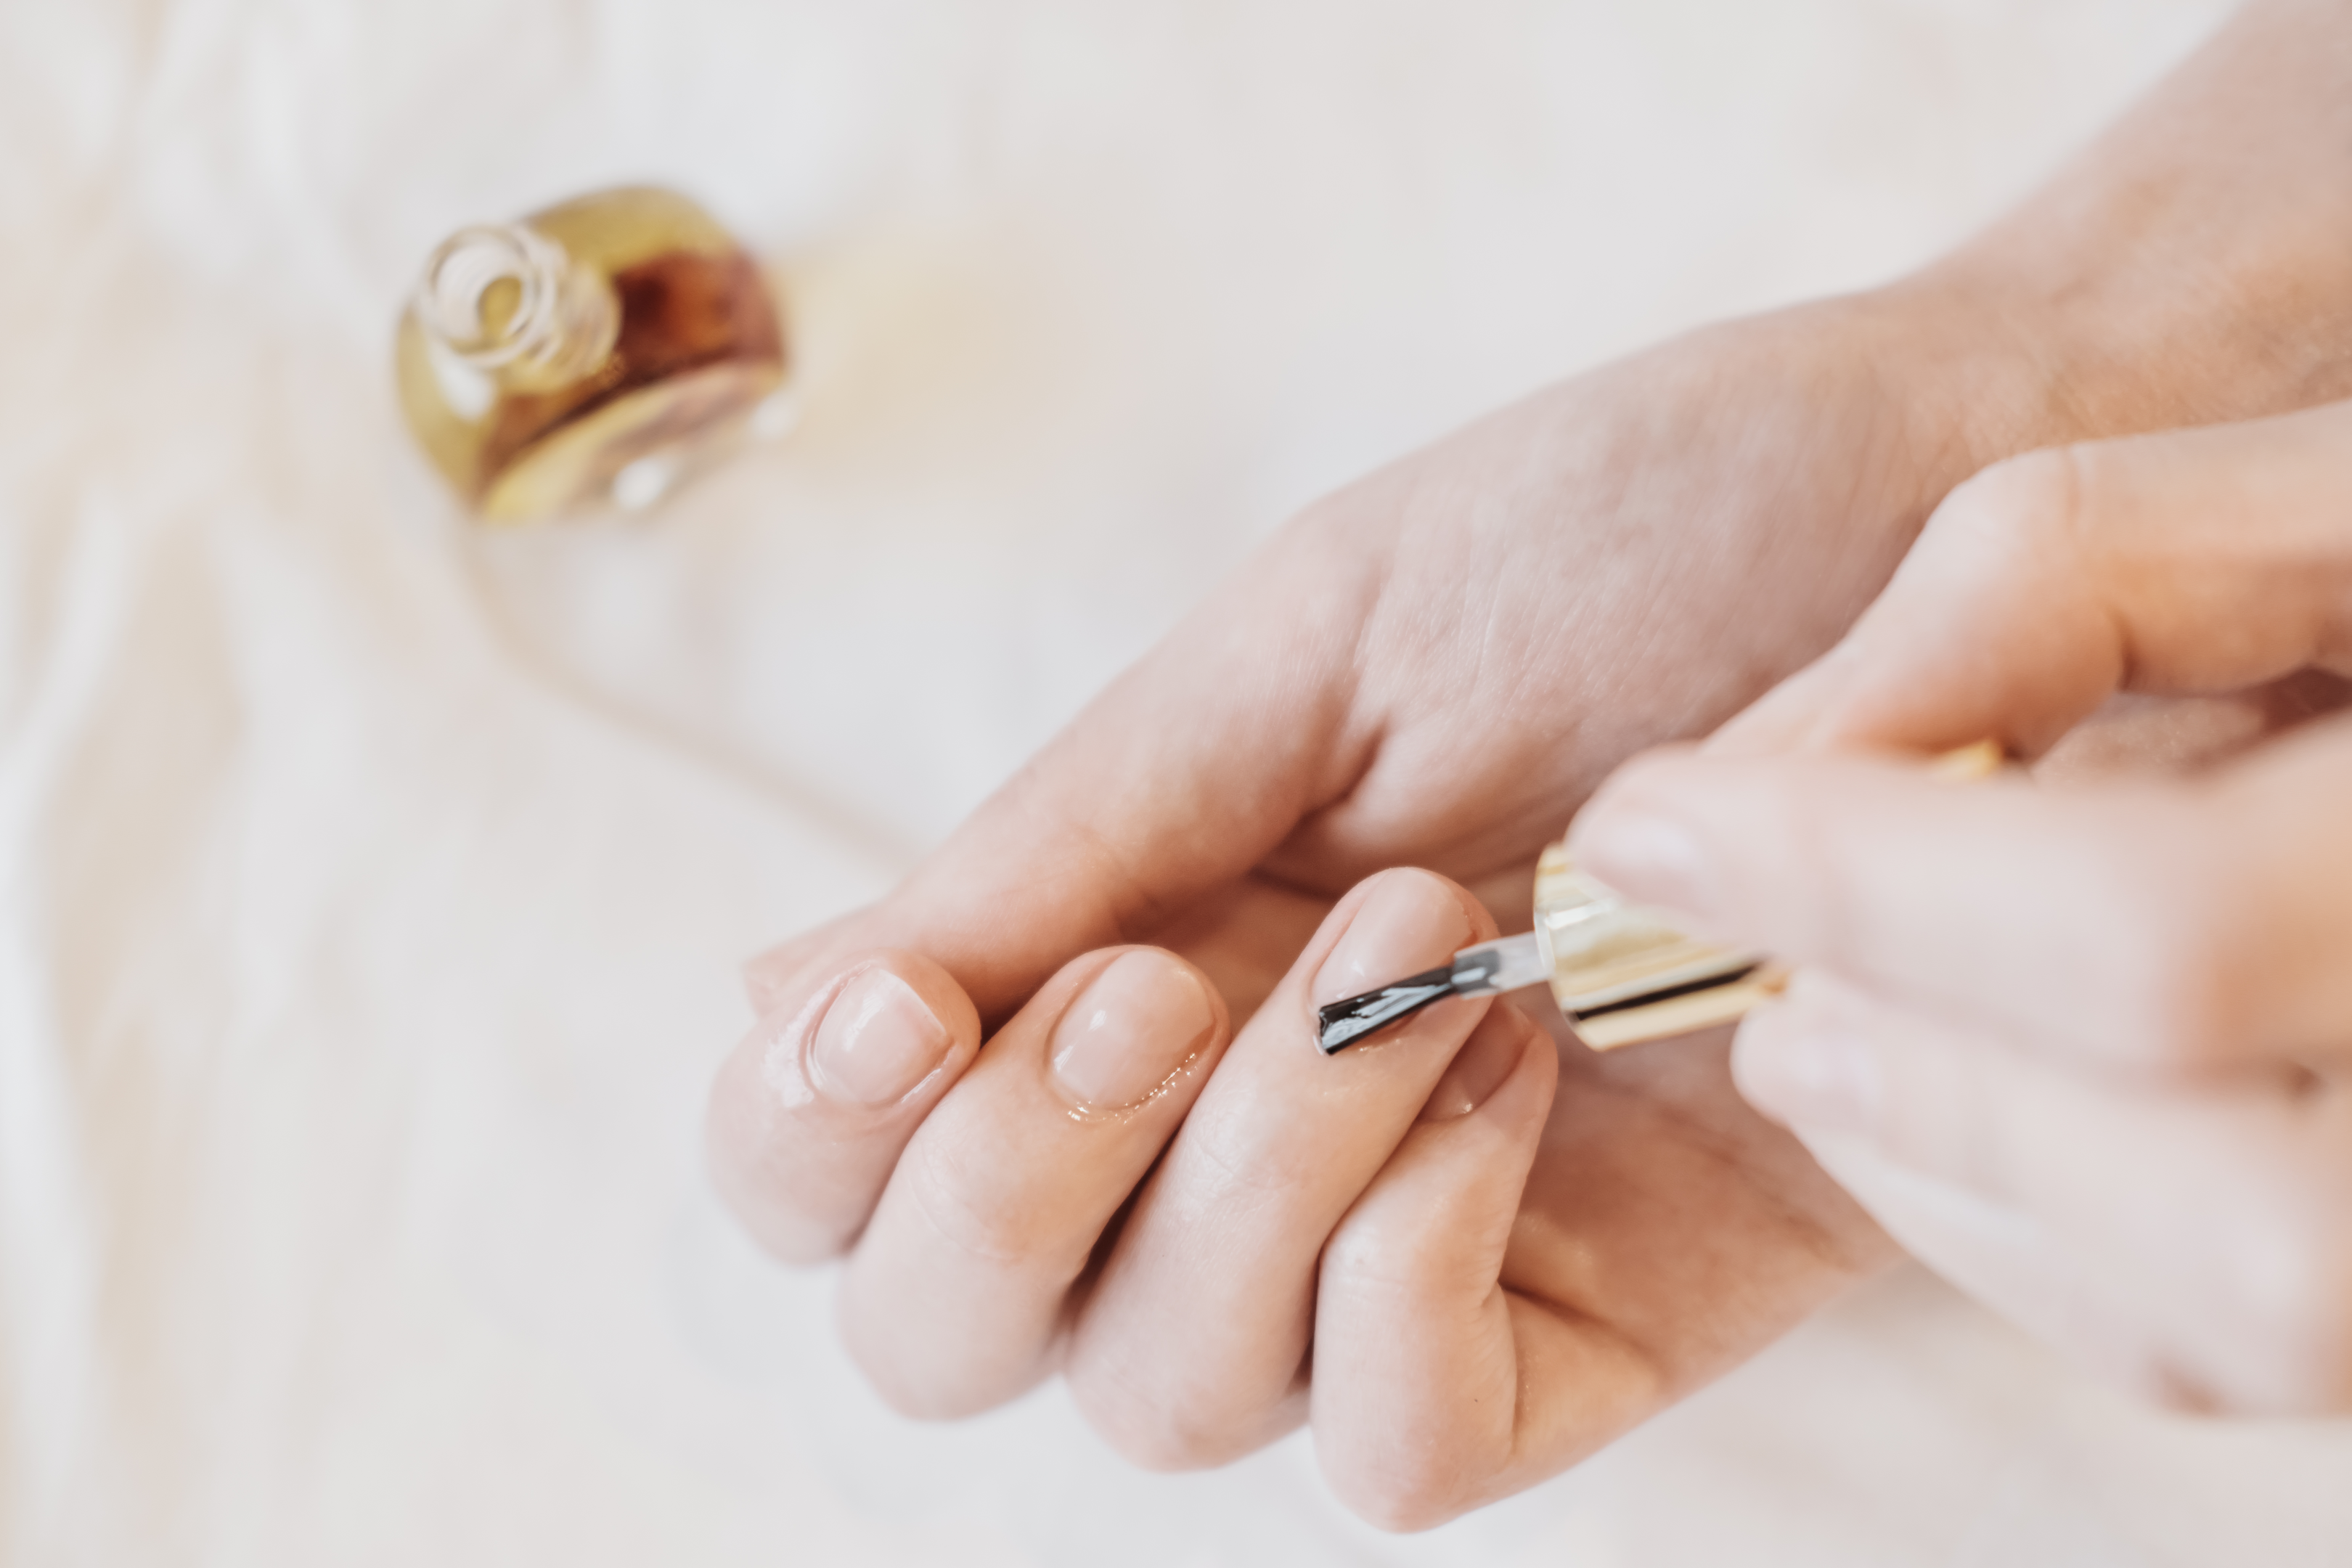 A woman applying cuticle oil to her nails after gel polish removal